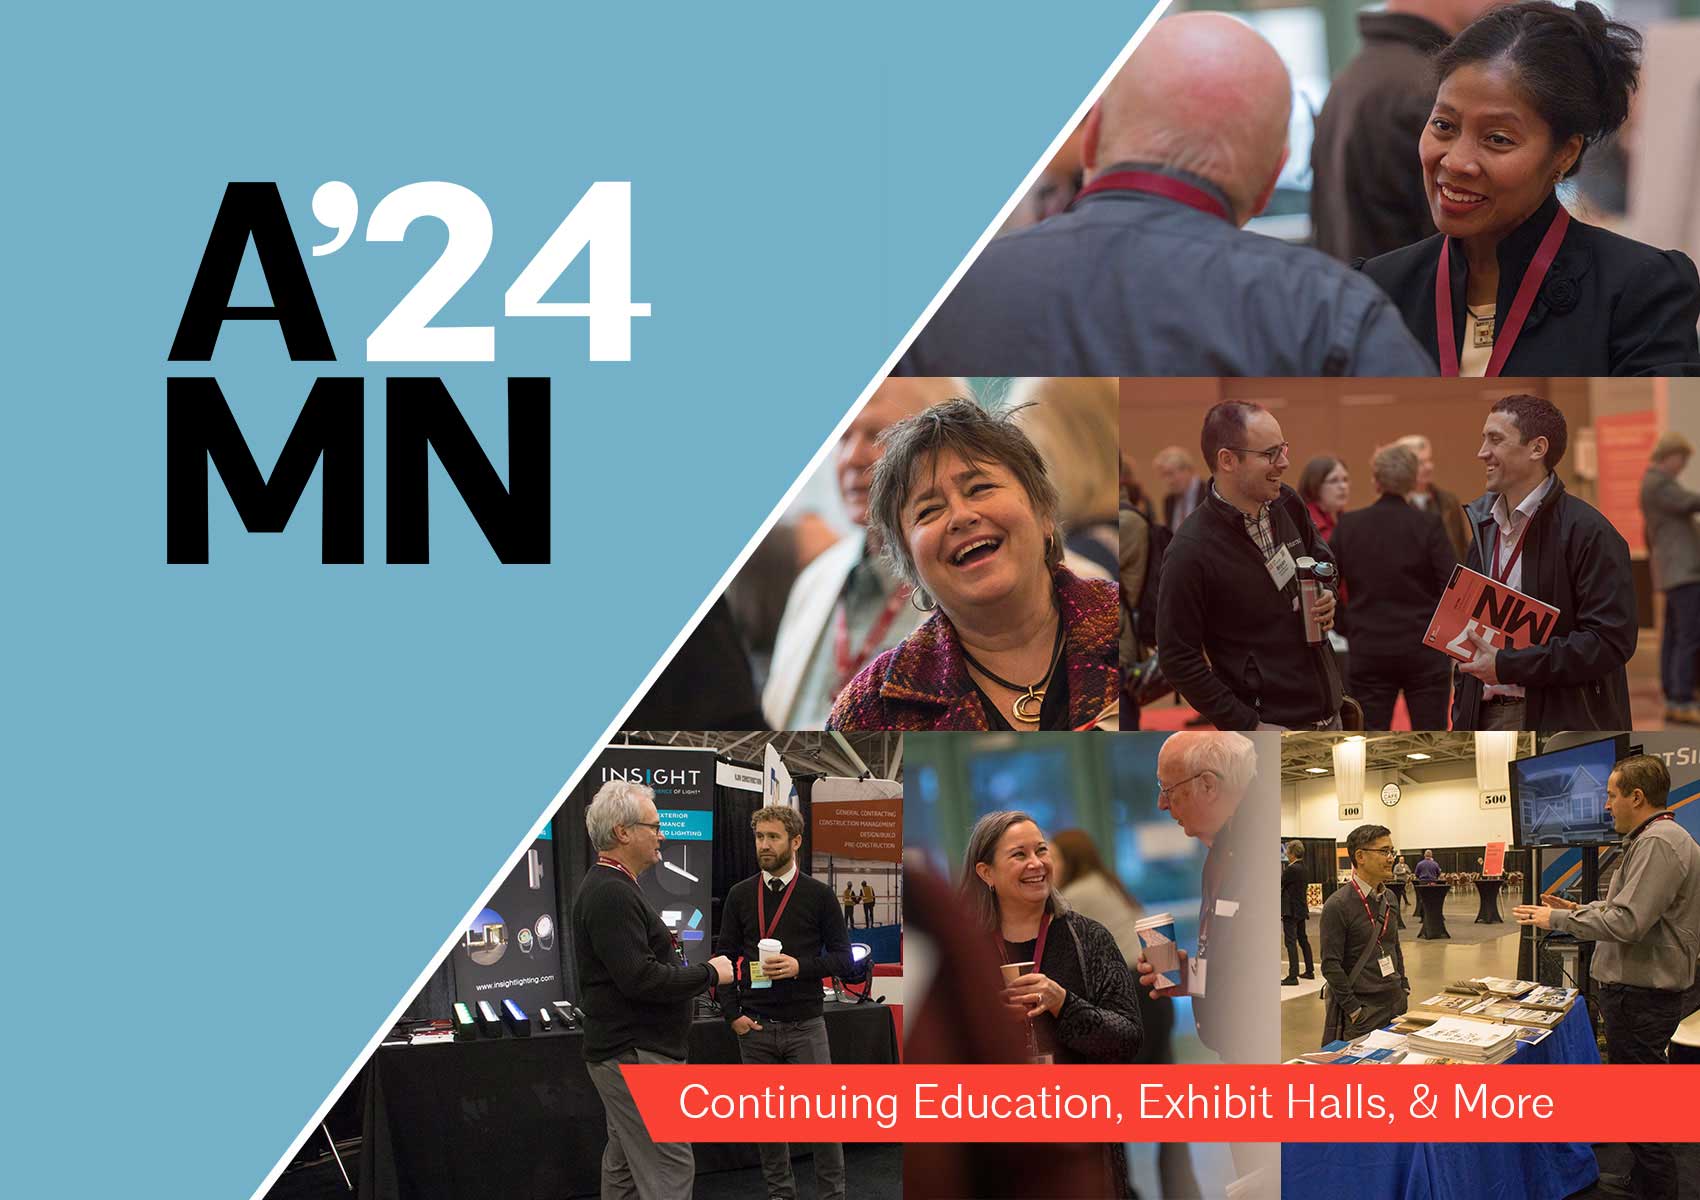 A’24 MN – The Minnesota Conference on Architecture